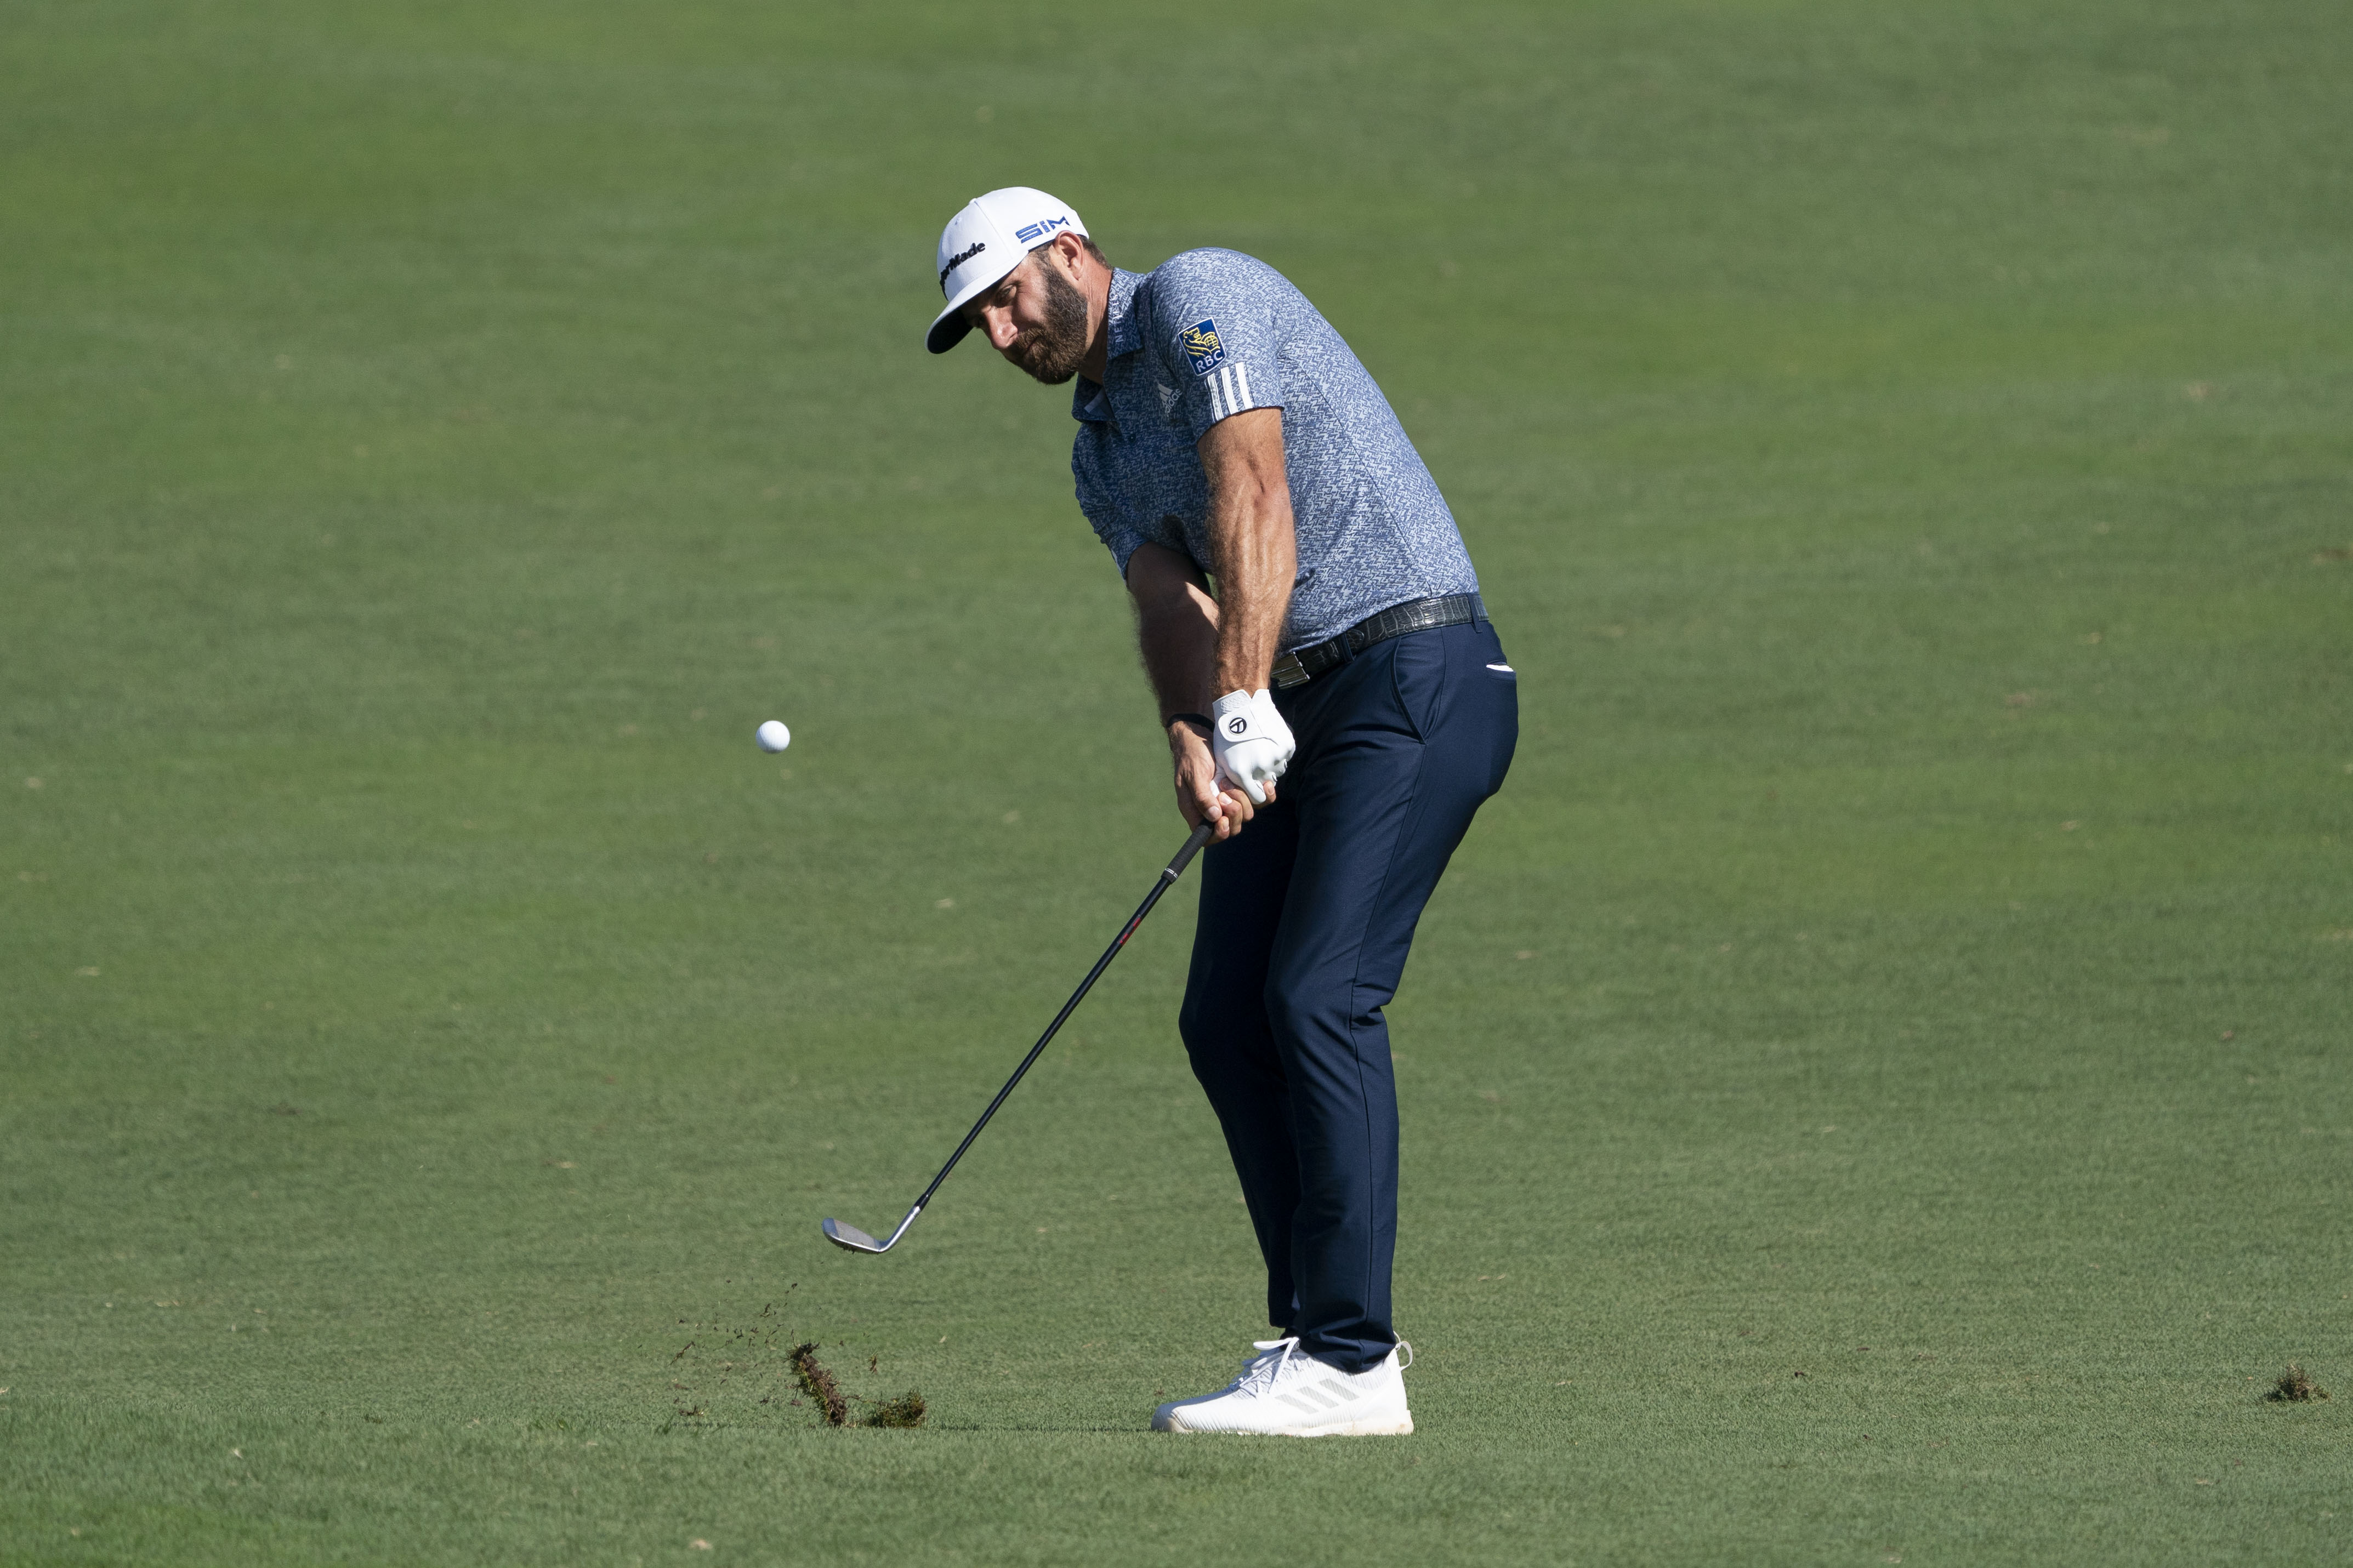 Dustin Johnson is a warm favourite at Pebble Beach, and rightly so...